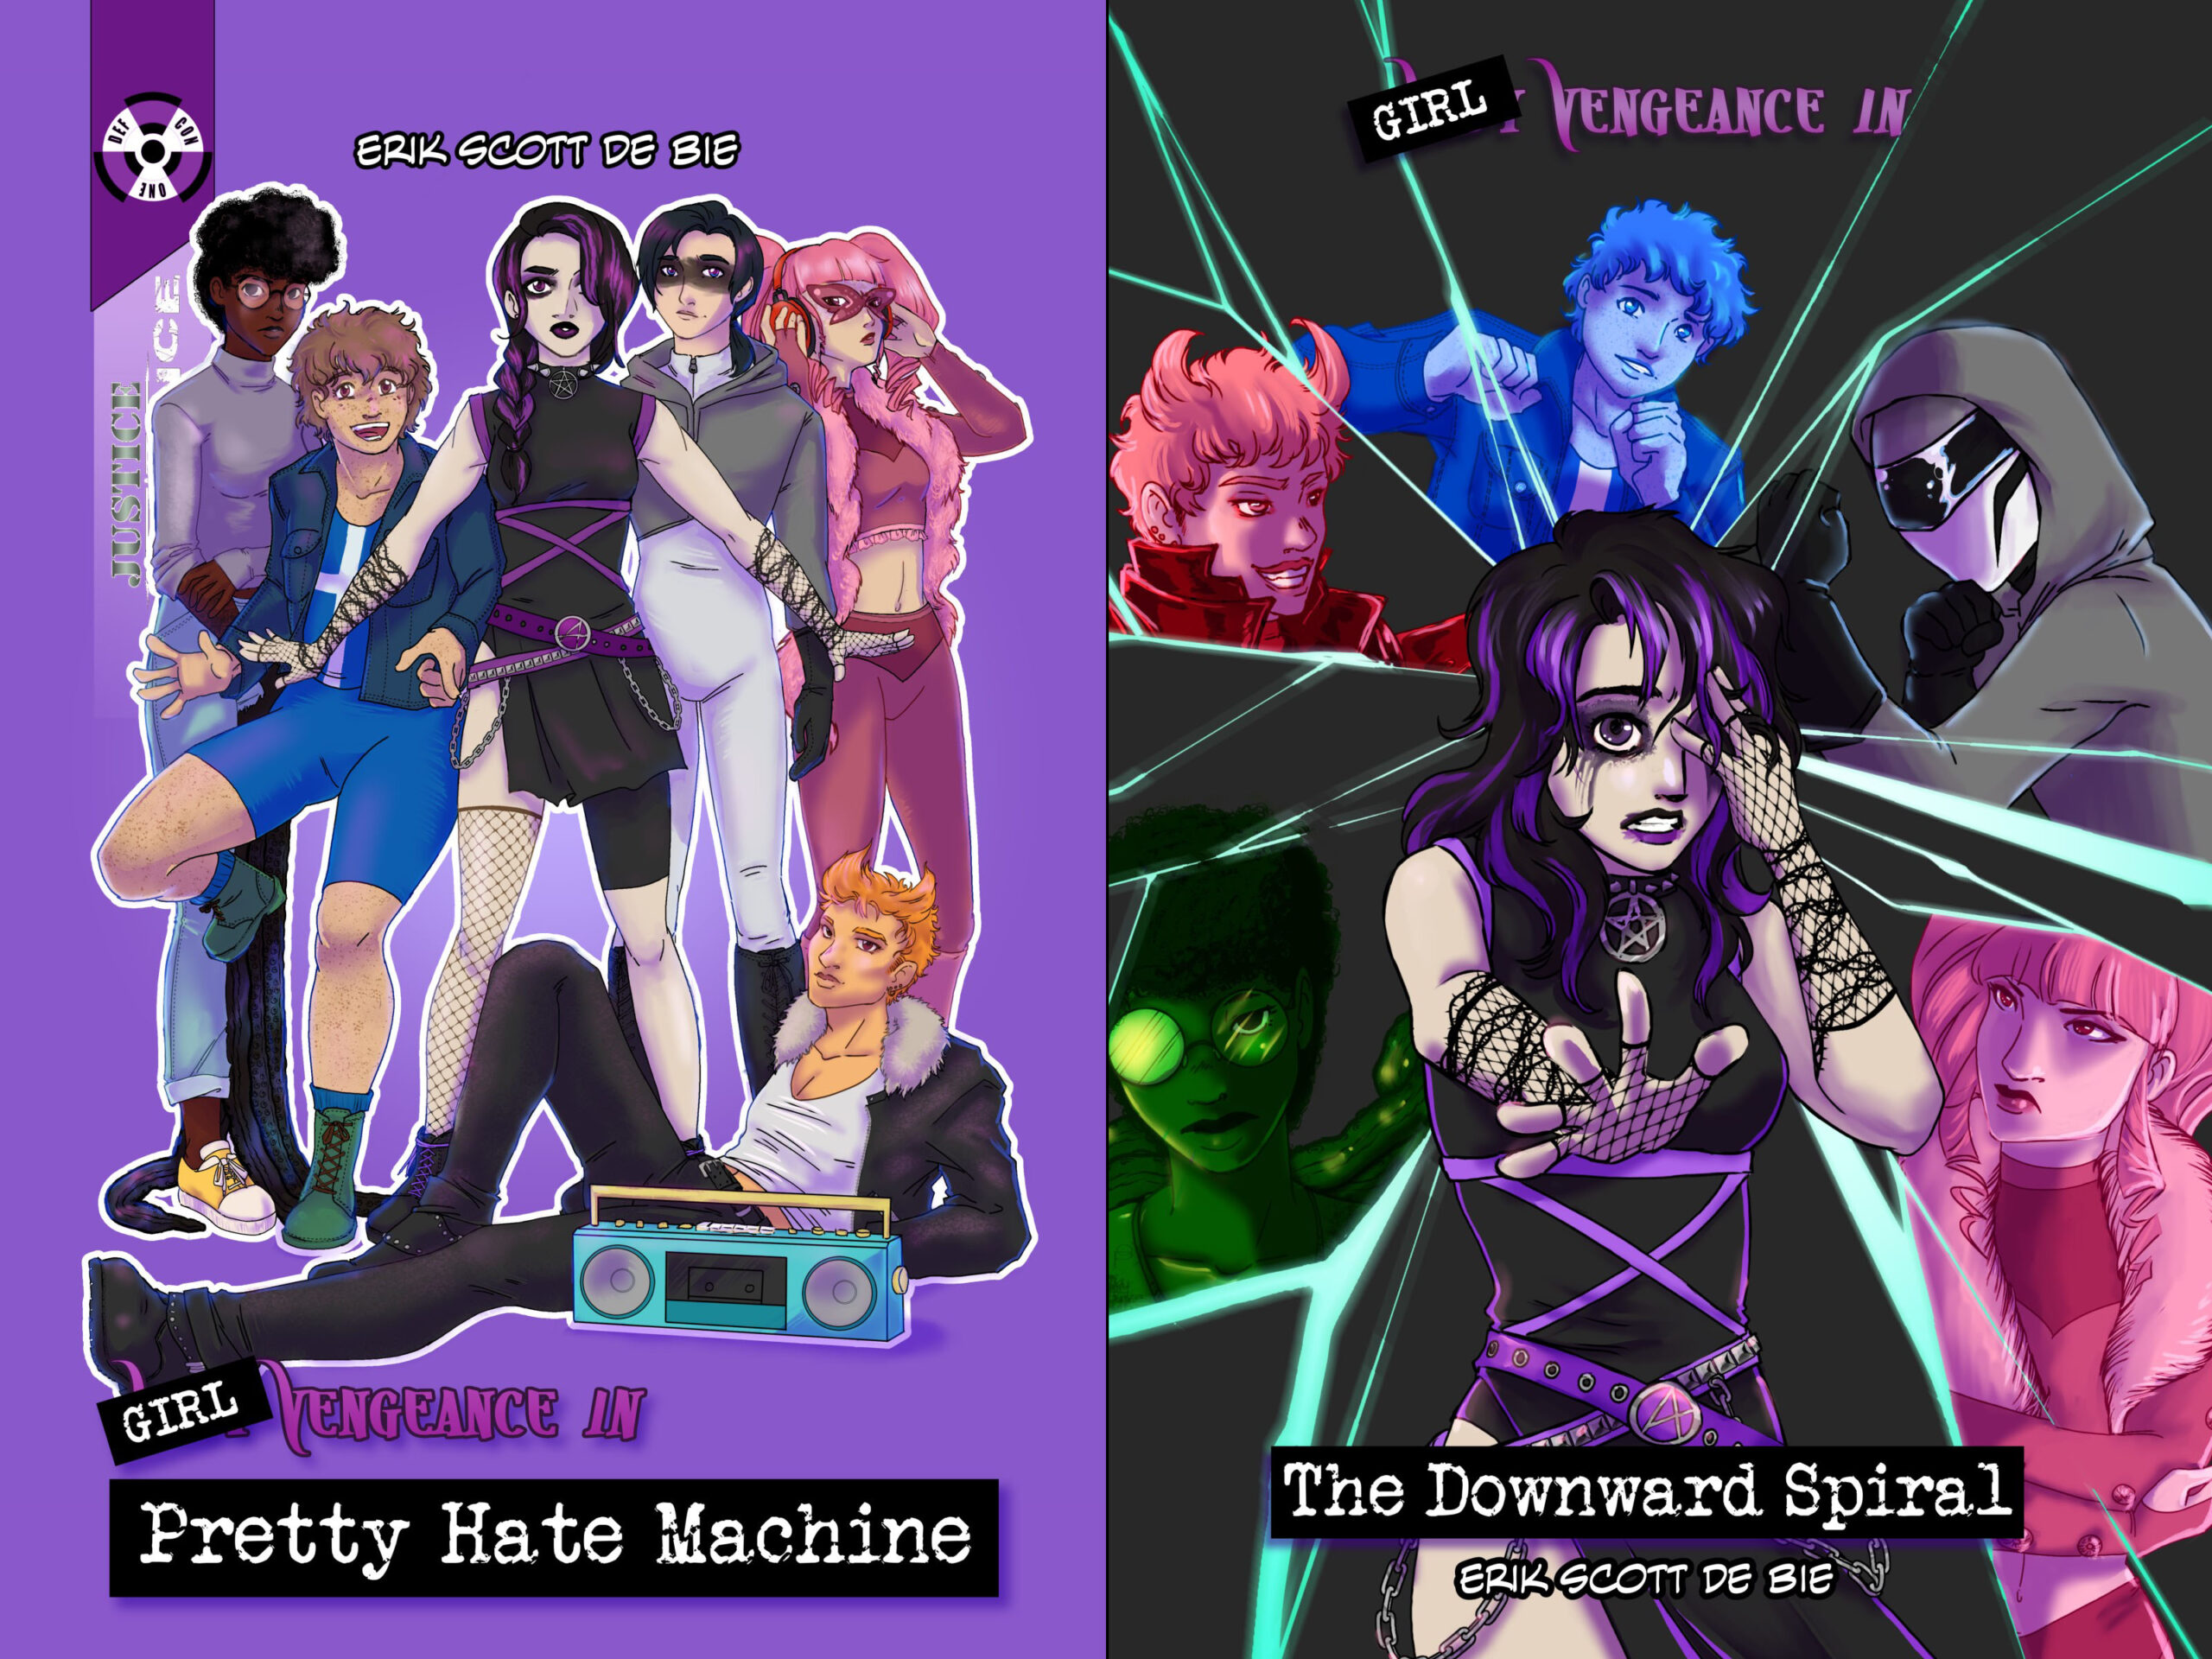 Two book covers for Girl Vengeance books.